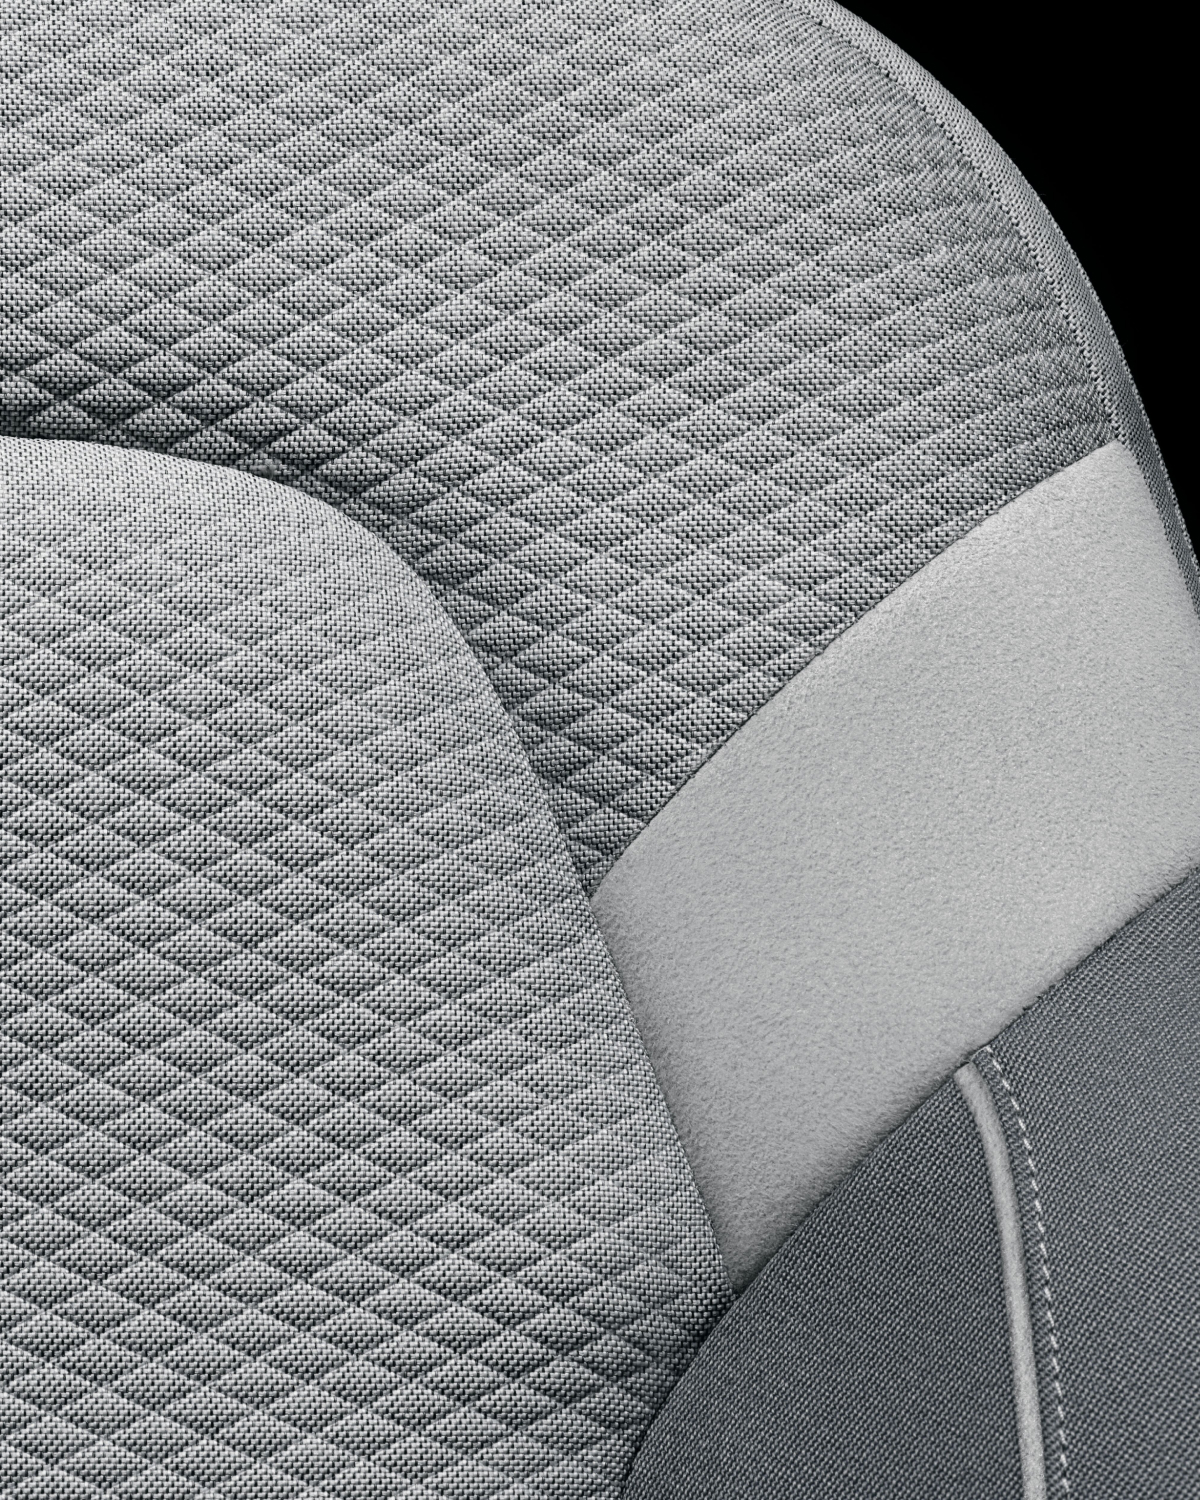 Close-up on the material for standard upholstery. Three shades of grey and patterns.